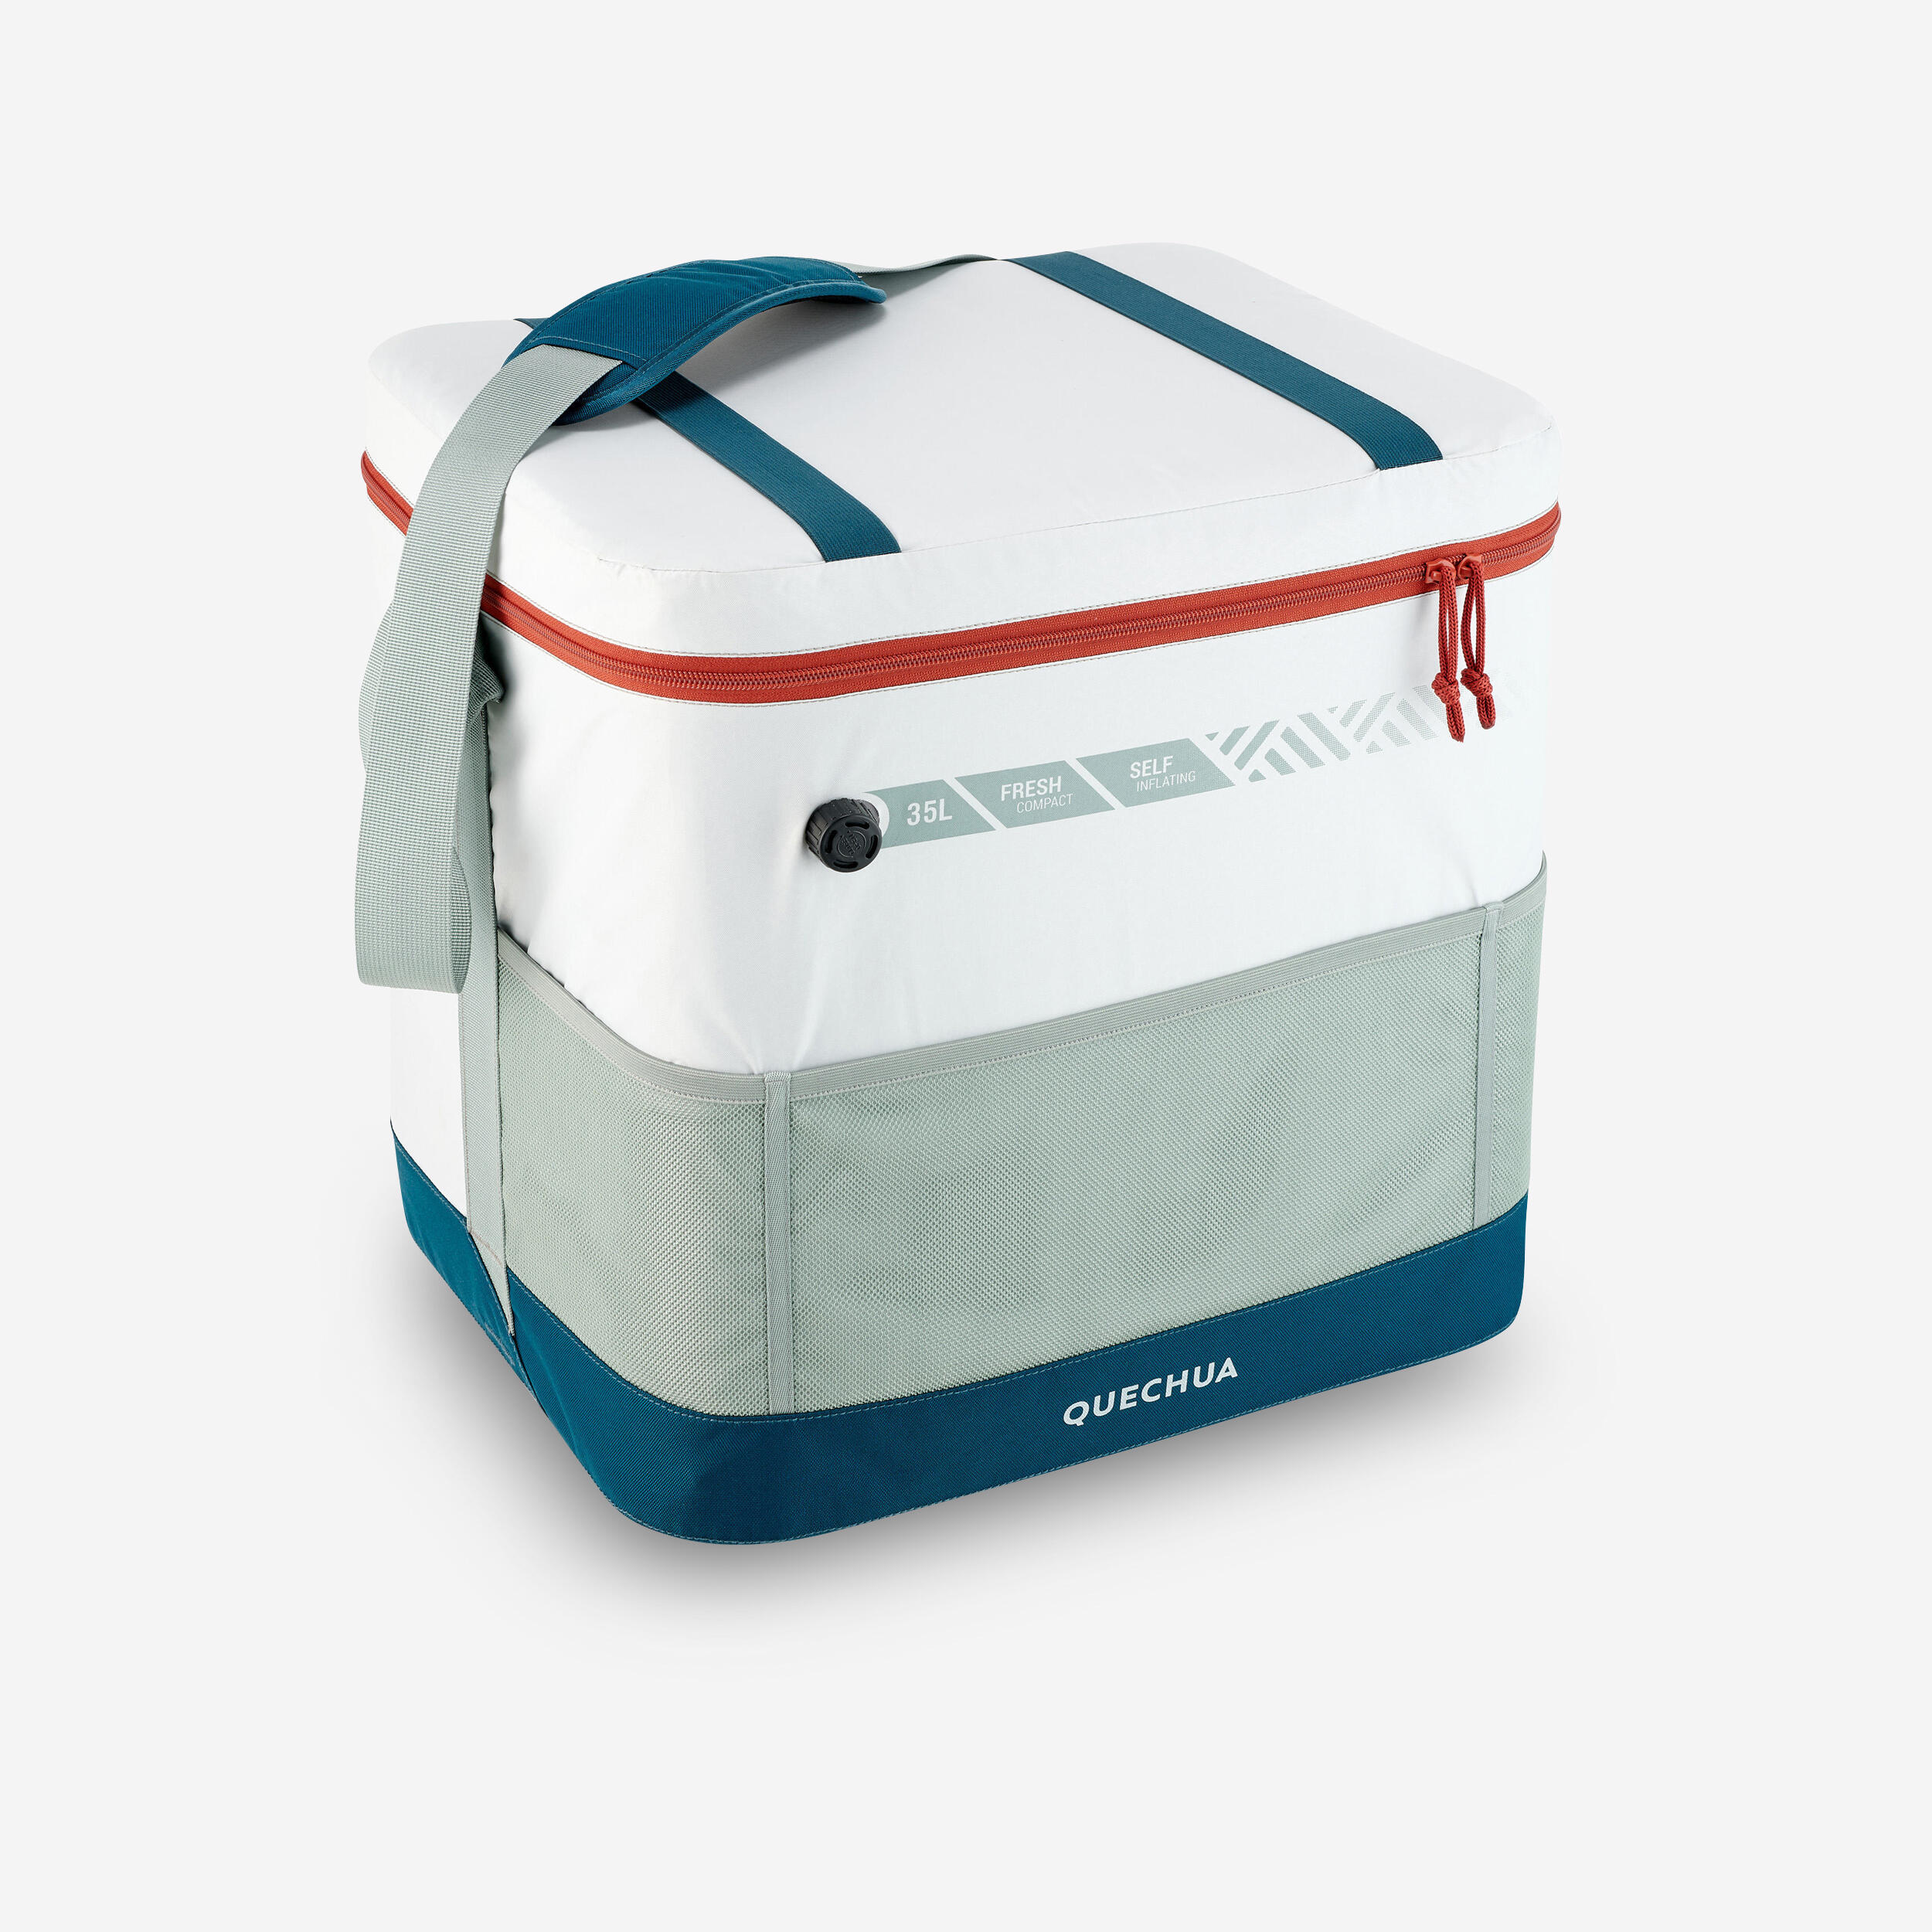 QUECHUA Camping Flexible Cooler - 35 L - Preserves Cold for 17 Hours